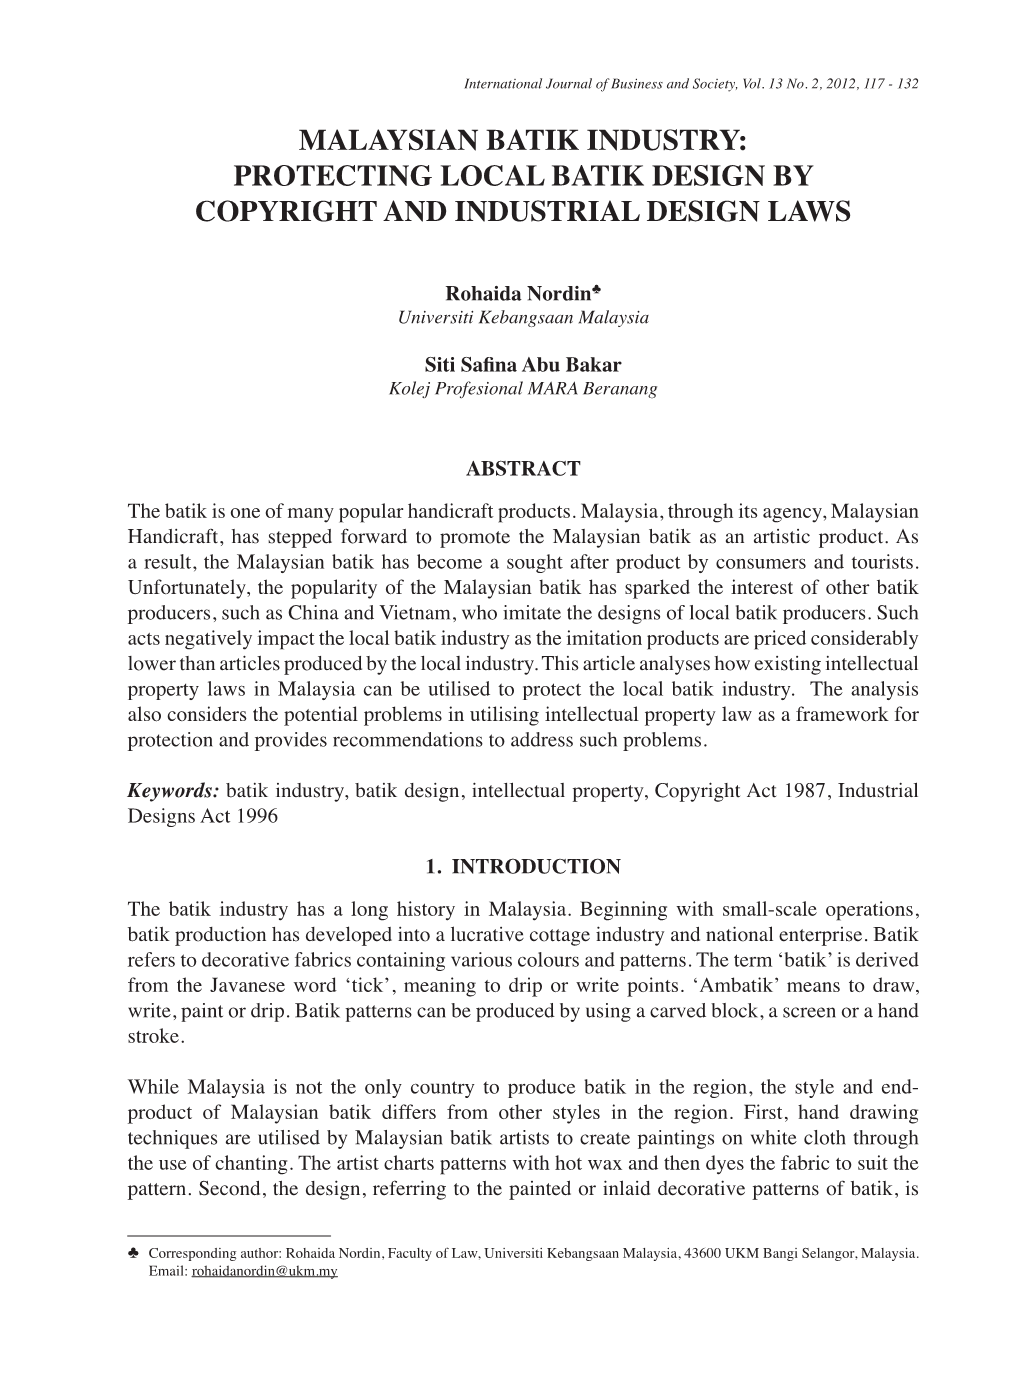 Malaysian Batik Industry: Protecting Local Batik Design by Copyright and Industrial Design Laws